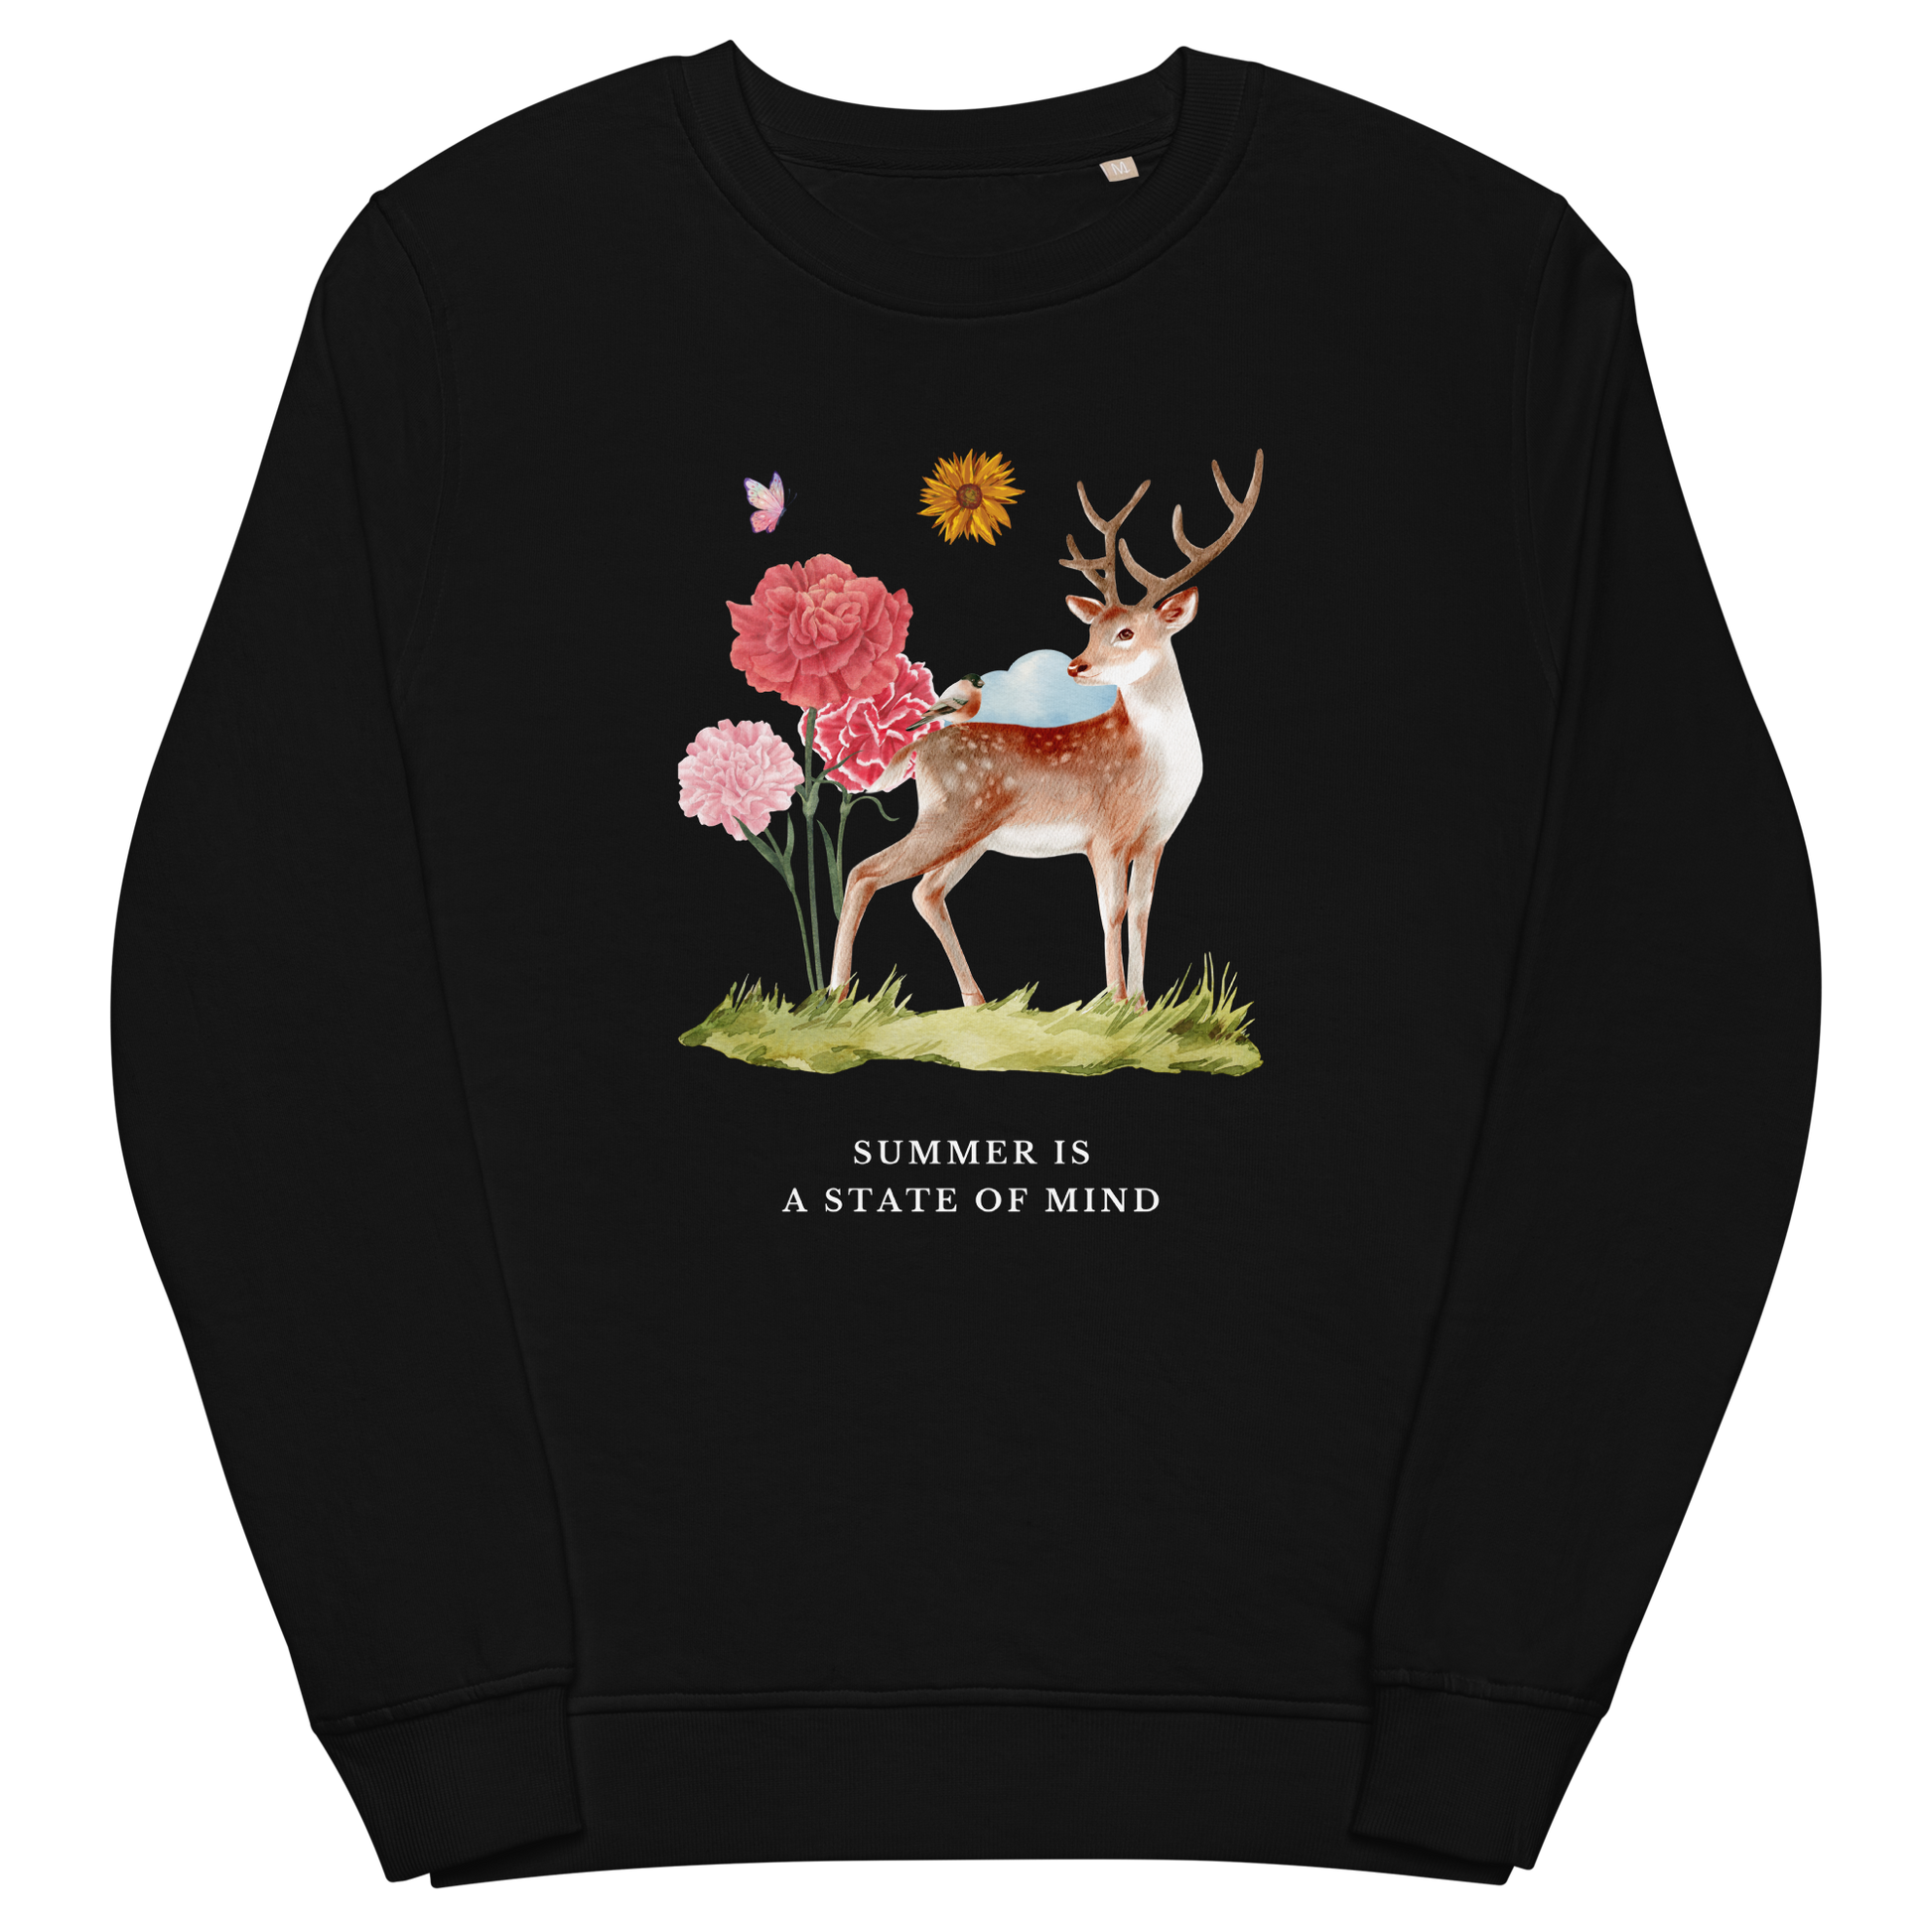 Black Organic Cotton Summer Is a State of Mind Sweatshirt featuring a Summer Is a State of Mind graphic on the chest - Cute Graphic Summer Sweatshirts - Boozy Fox